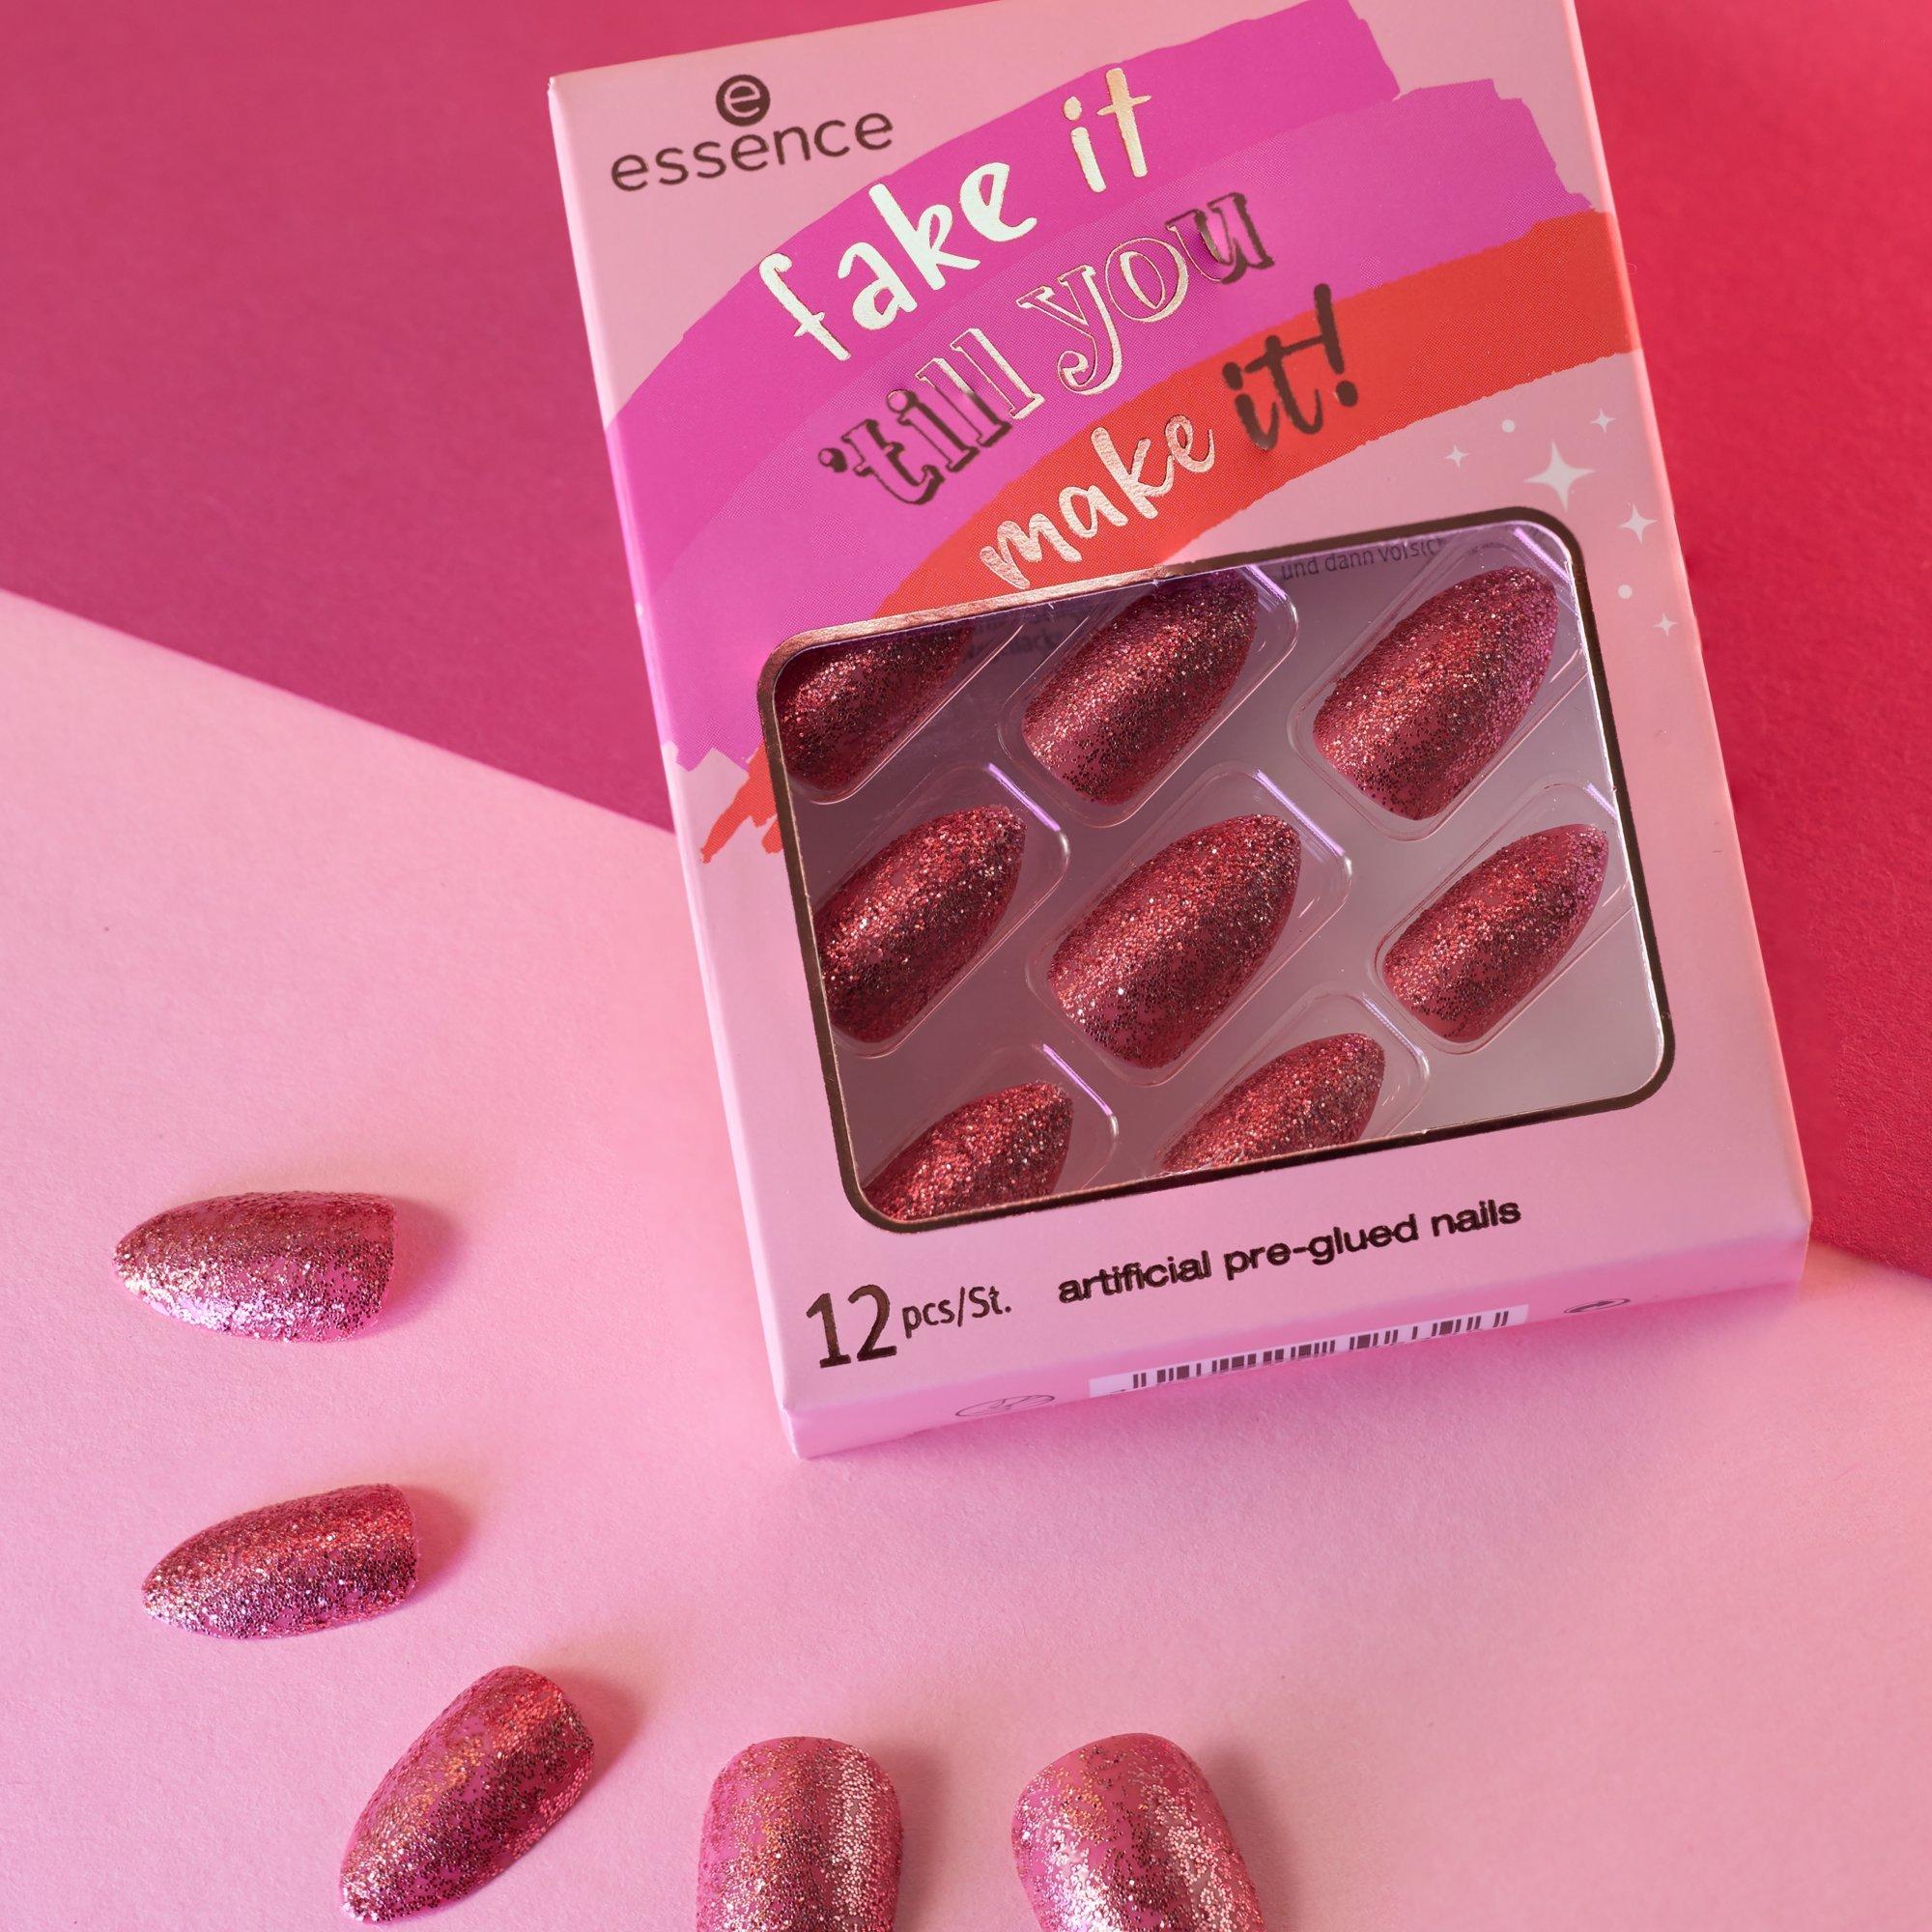 fake it 'till you make it! artificial pre-glued nails